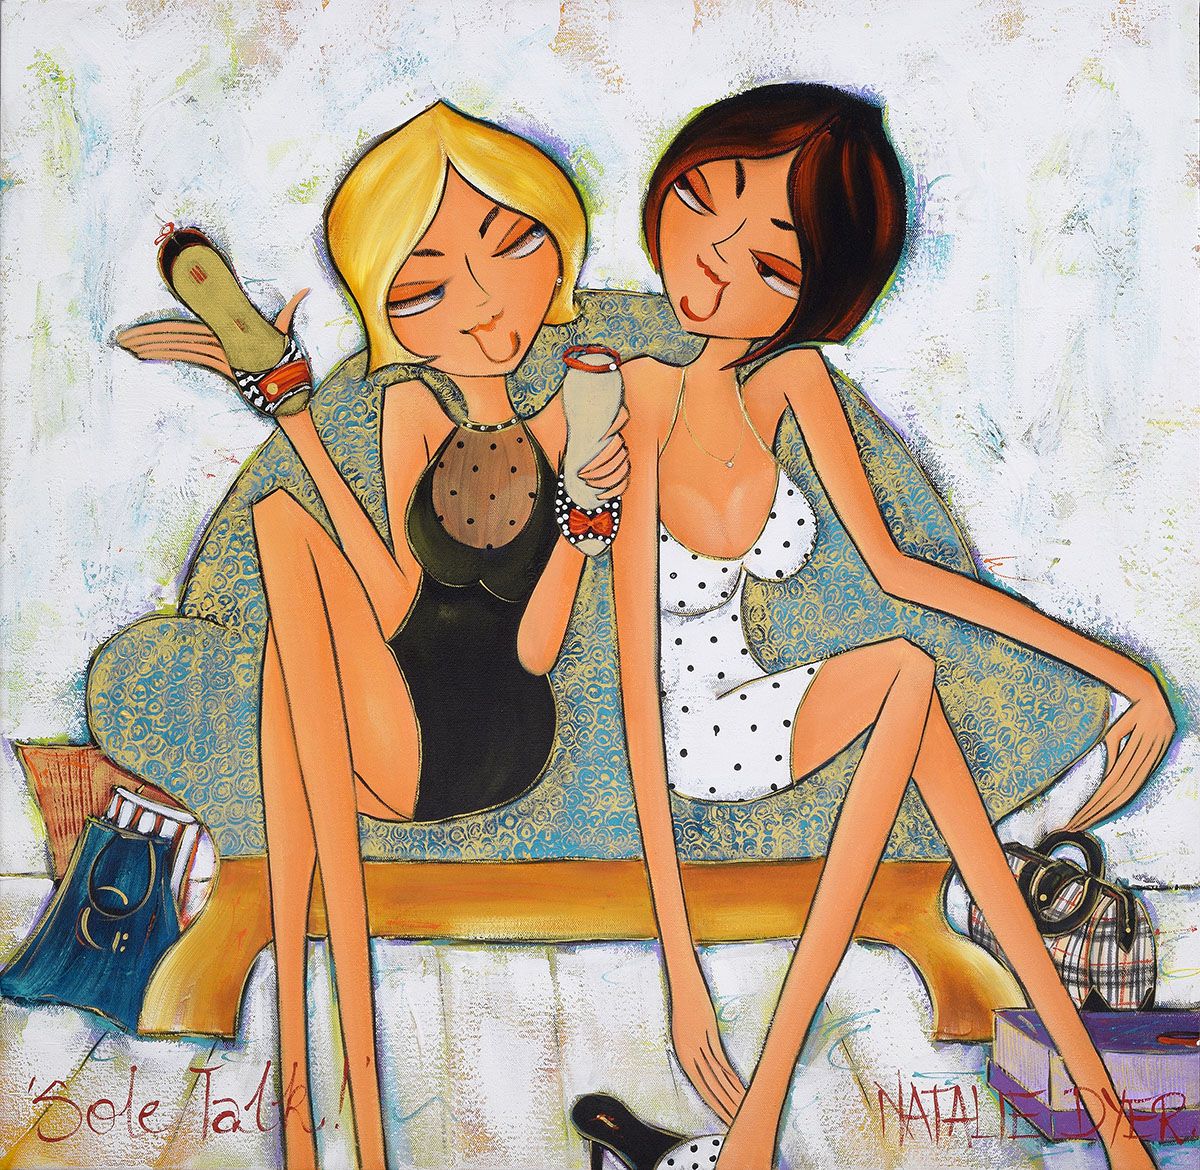 Natalie Dyer - 'Sole Talk' - Limited Edition Print